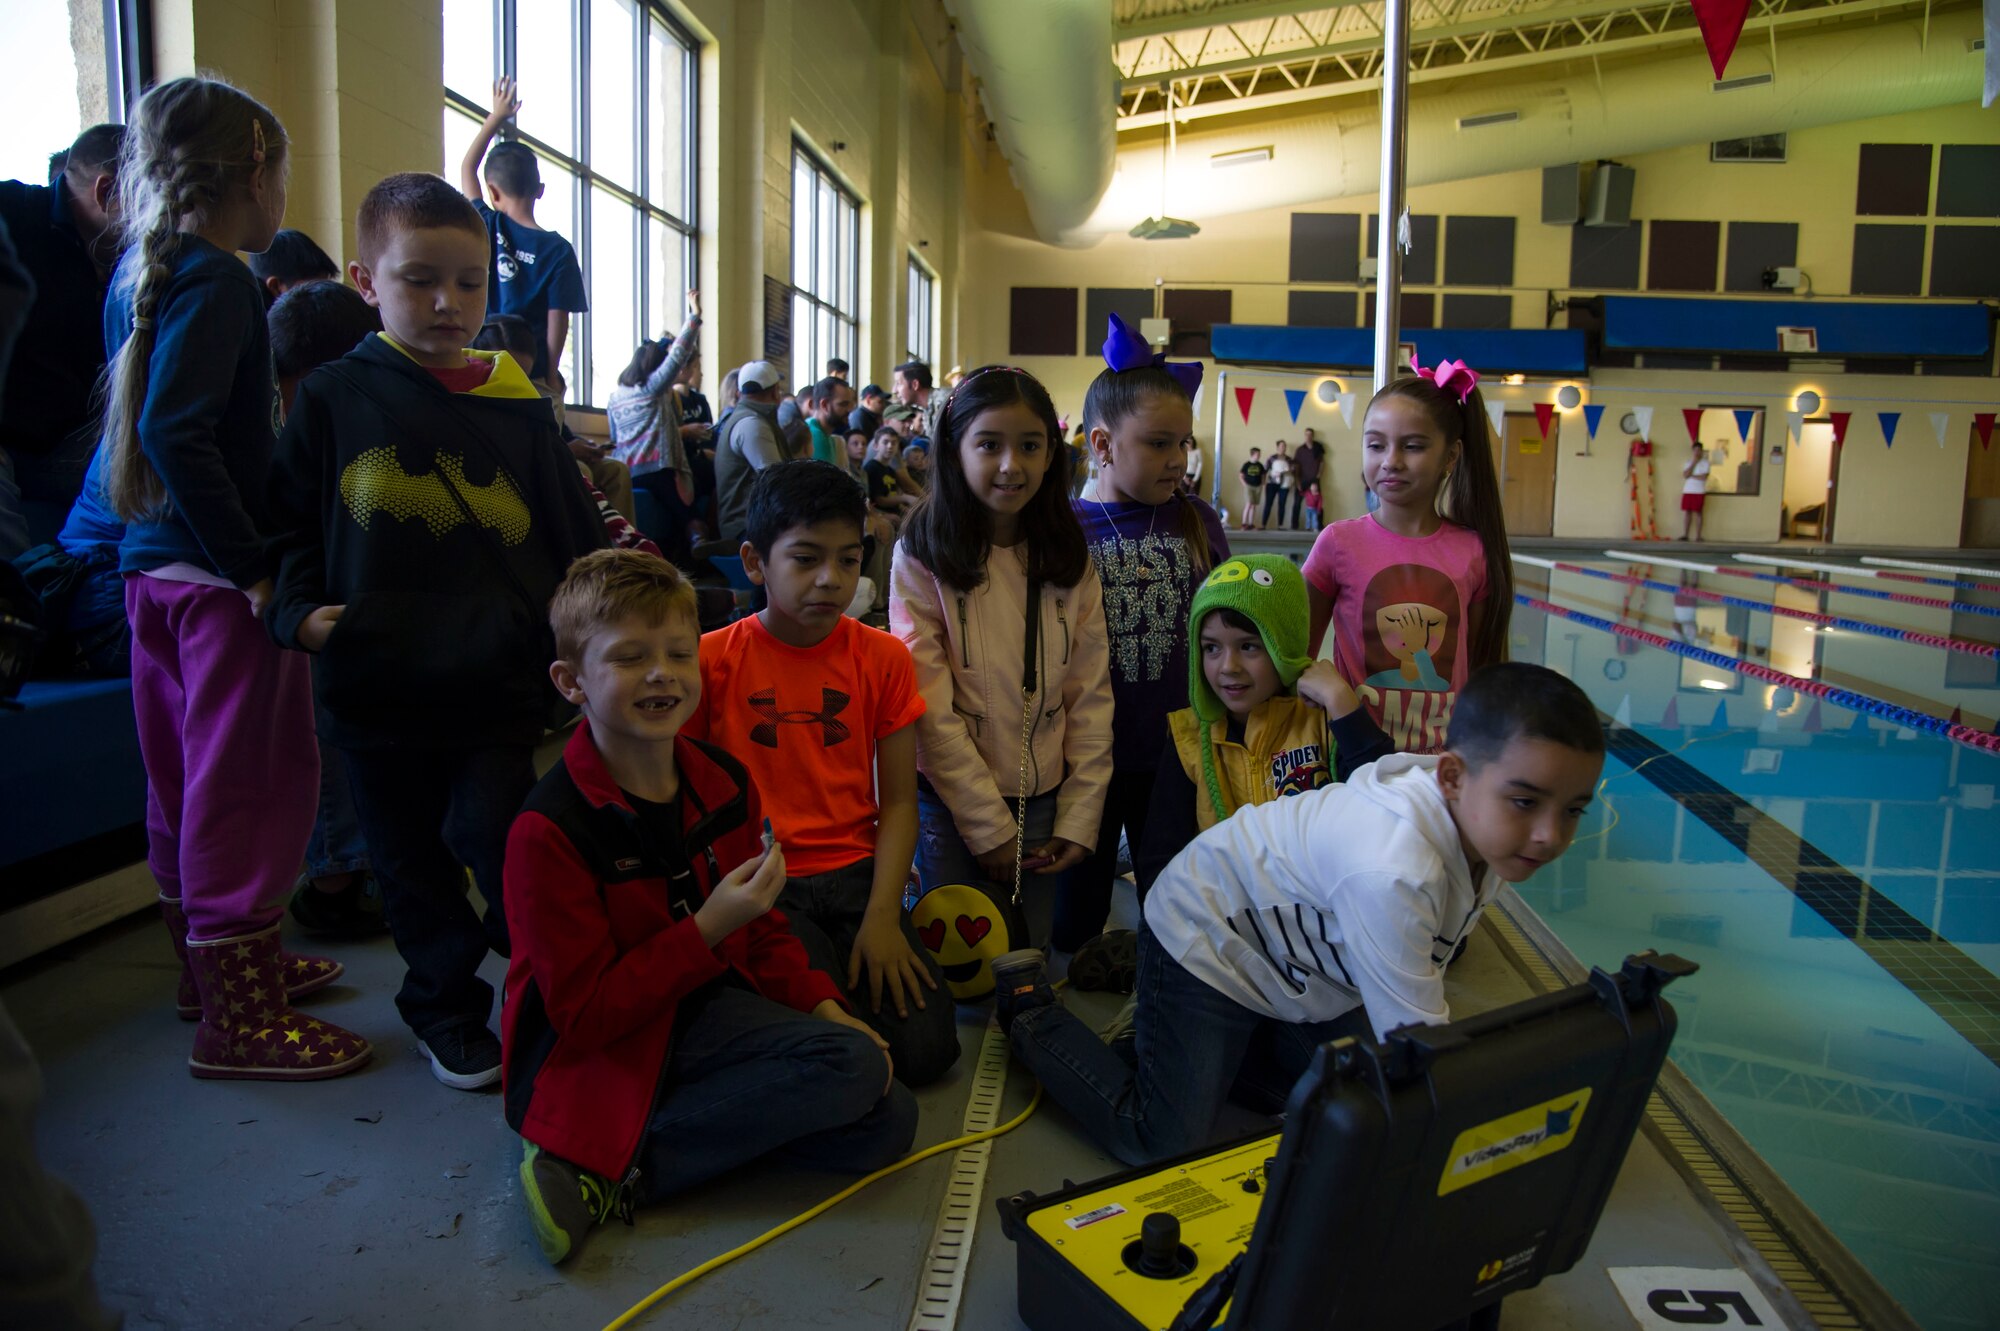 Attendees at Laughlin’s first robot rodeo operate the U.S. Customs and Border Patrol underwater robot during cyber awareness week at Laughlin Air Force Base, Texas, Oct. 28, 2017. The robots featured at the rodeo varied from prebuilt creations to explosive ordinance disposal robots from the U.S. Customs and Border Patrol.